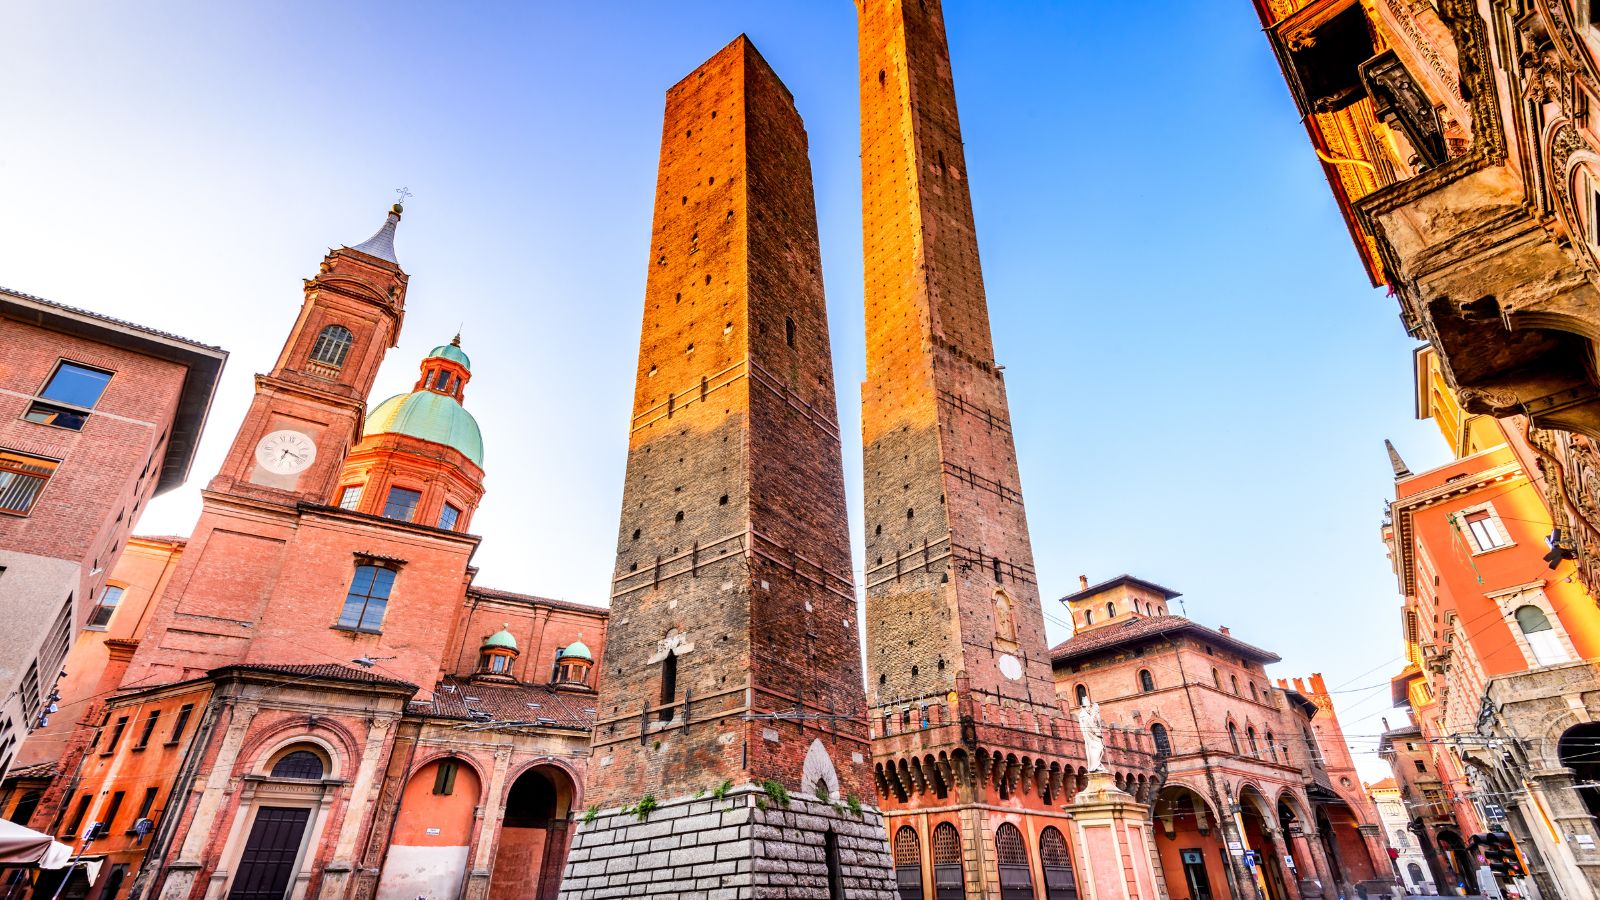 <p>You’ll find Bologna in the north of Italy. As the name suggests, it’s famous for its bolognese sauce, which you’ll want to try if you visit the city. Bologna is rich in history and has many medieval towers and the University of Bologna, which is the oldest in Europe. </p>